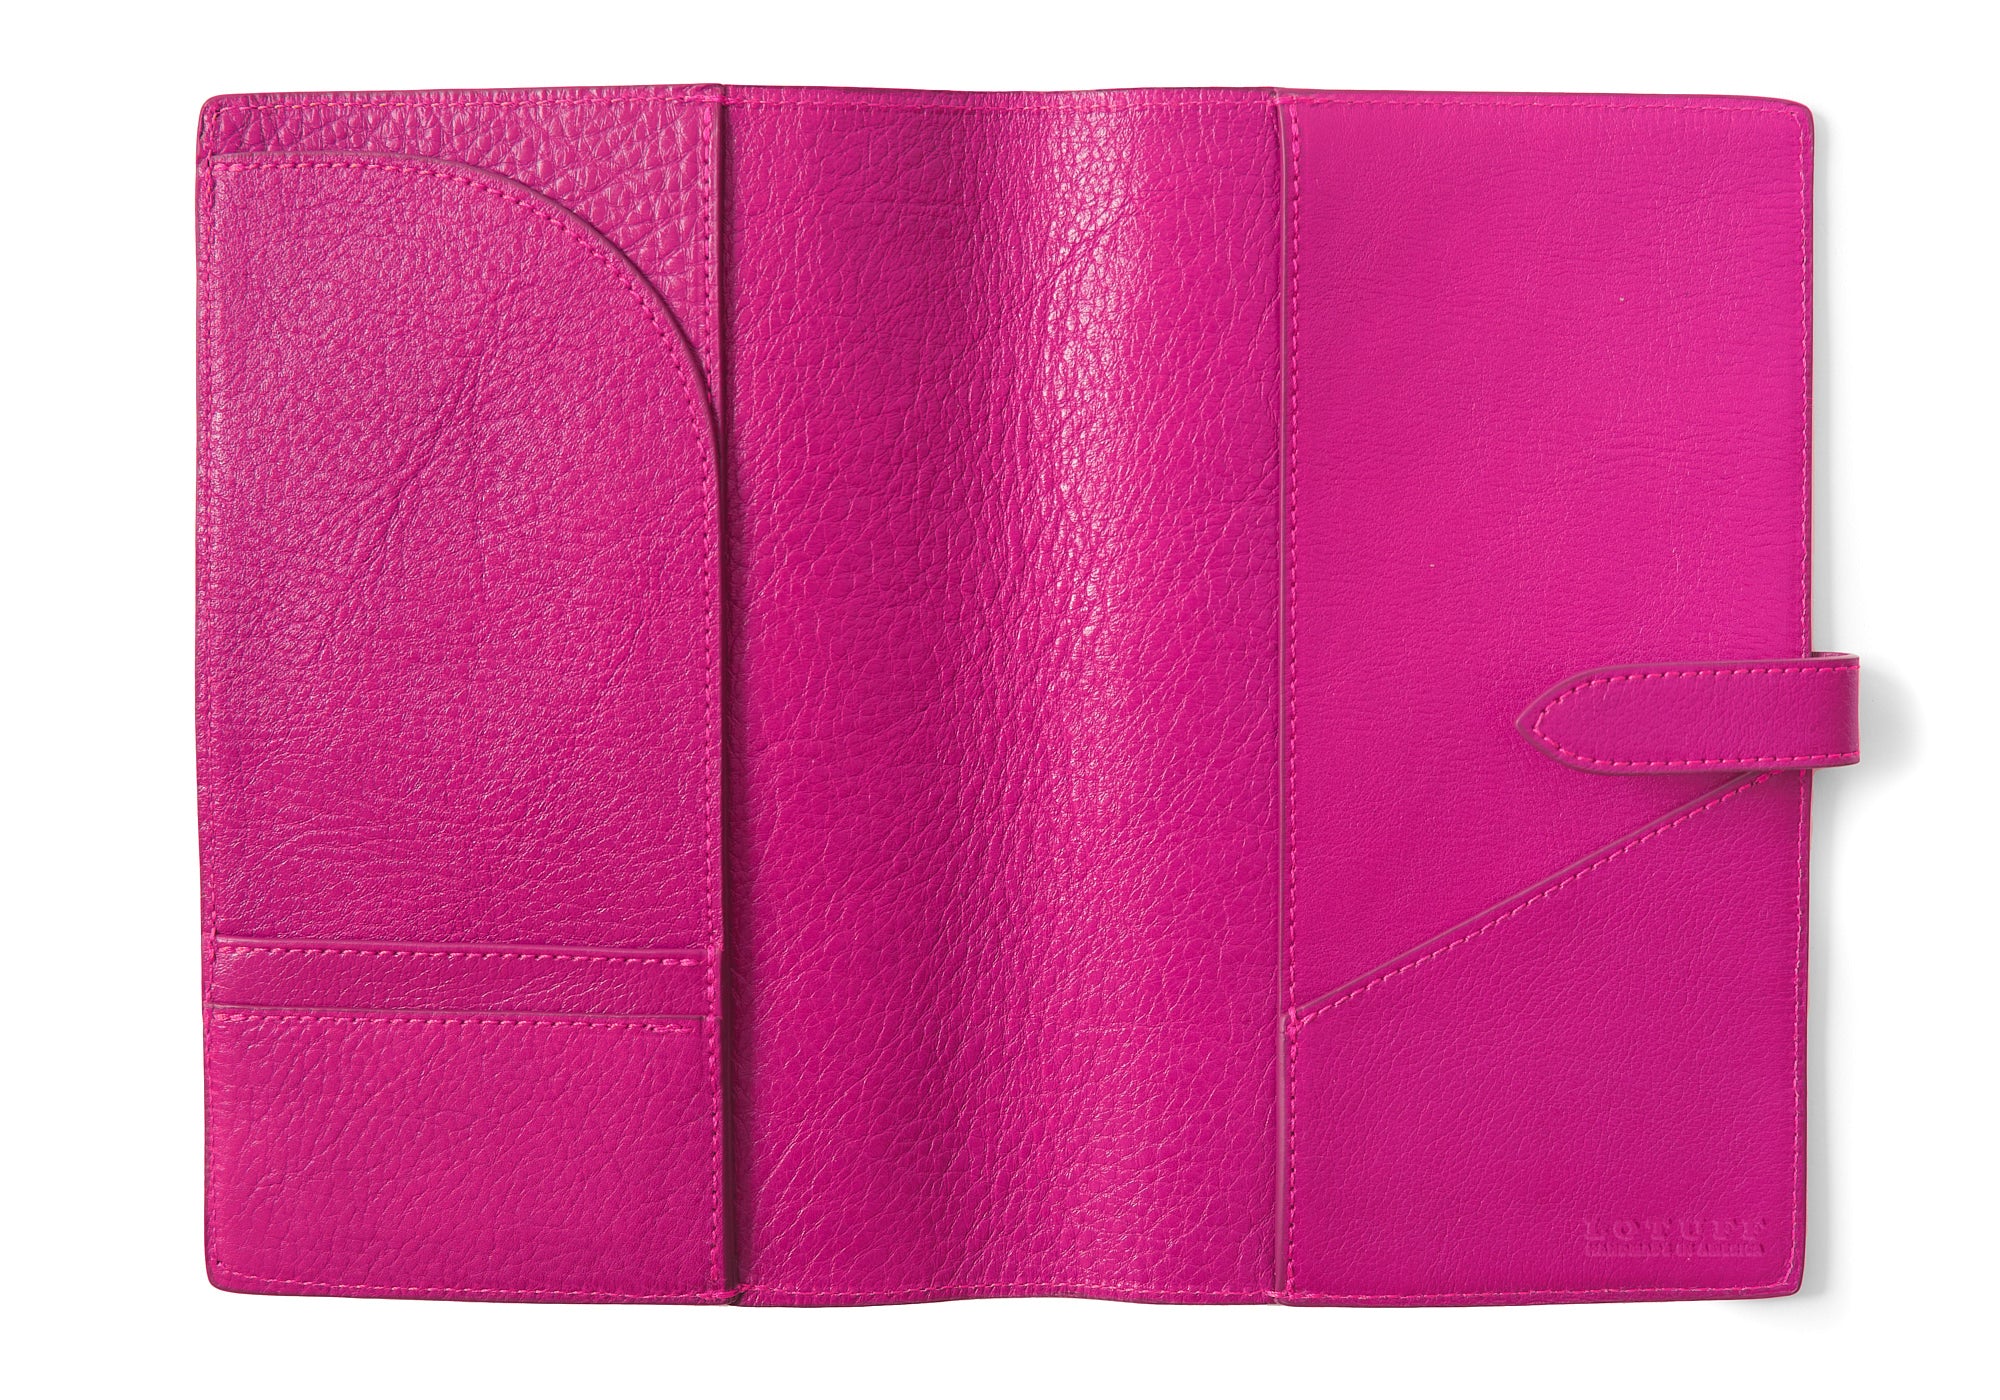 Top of Leather Travel Journal Magenta